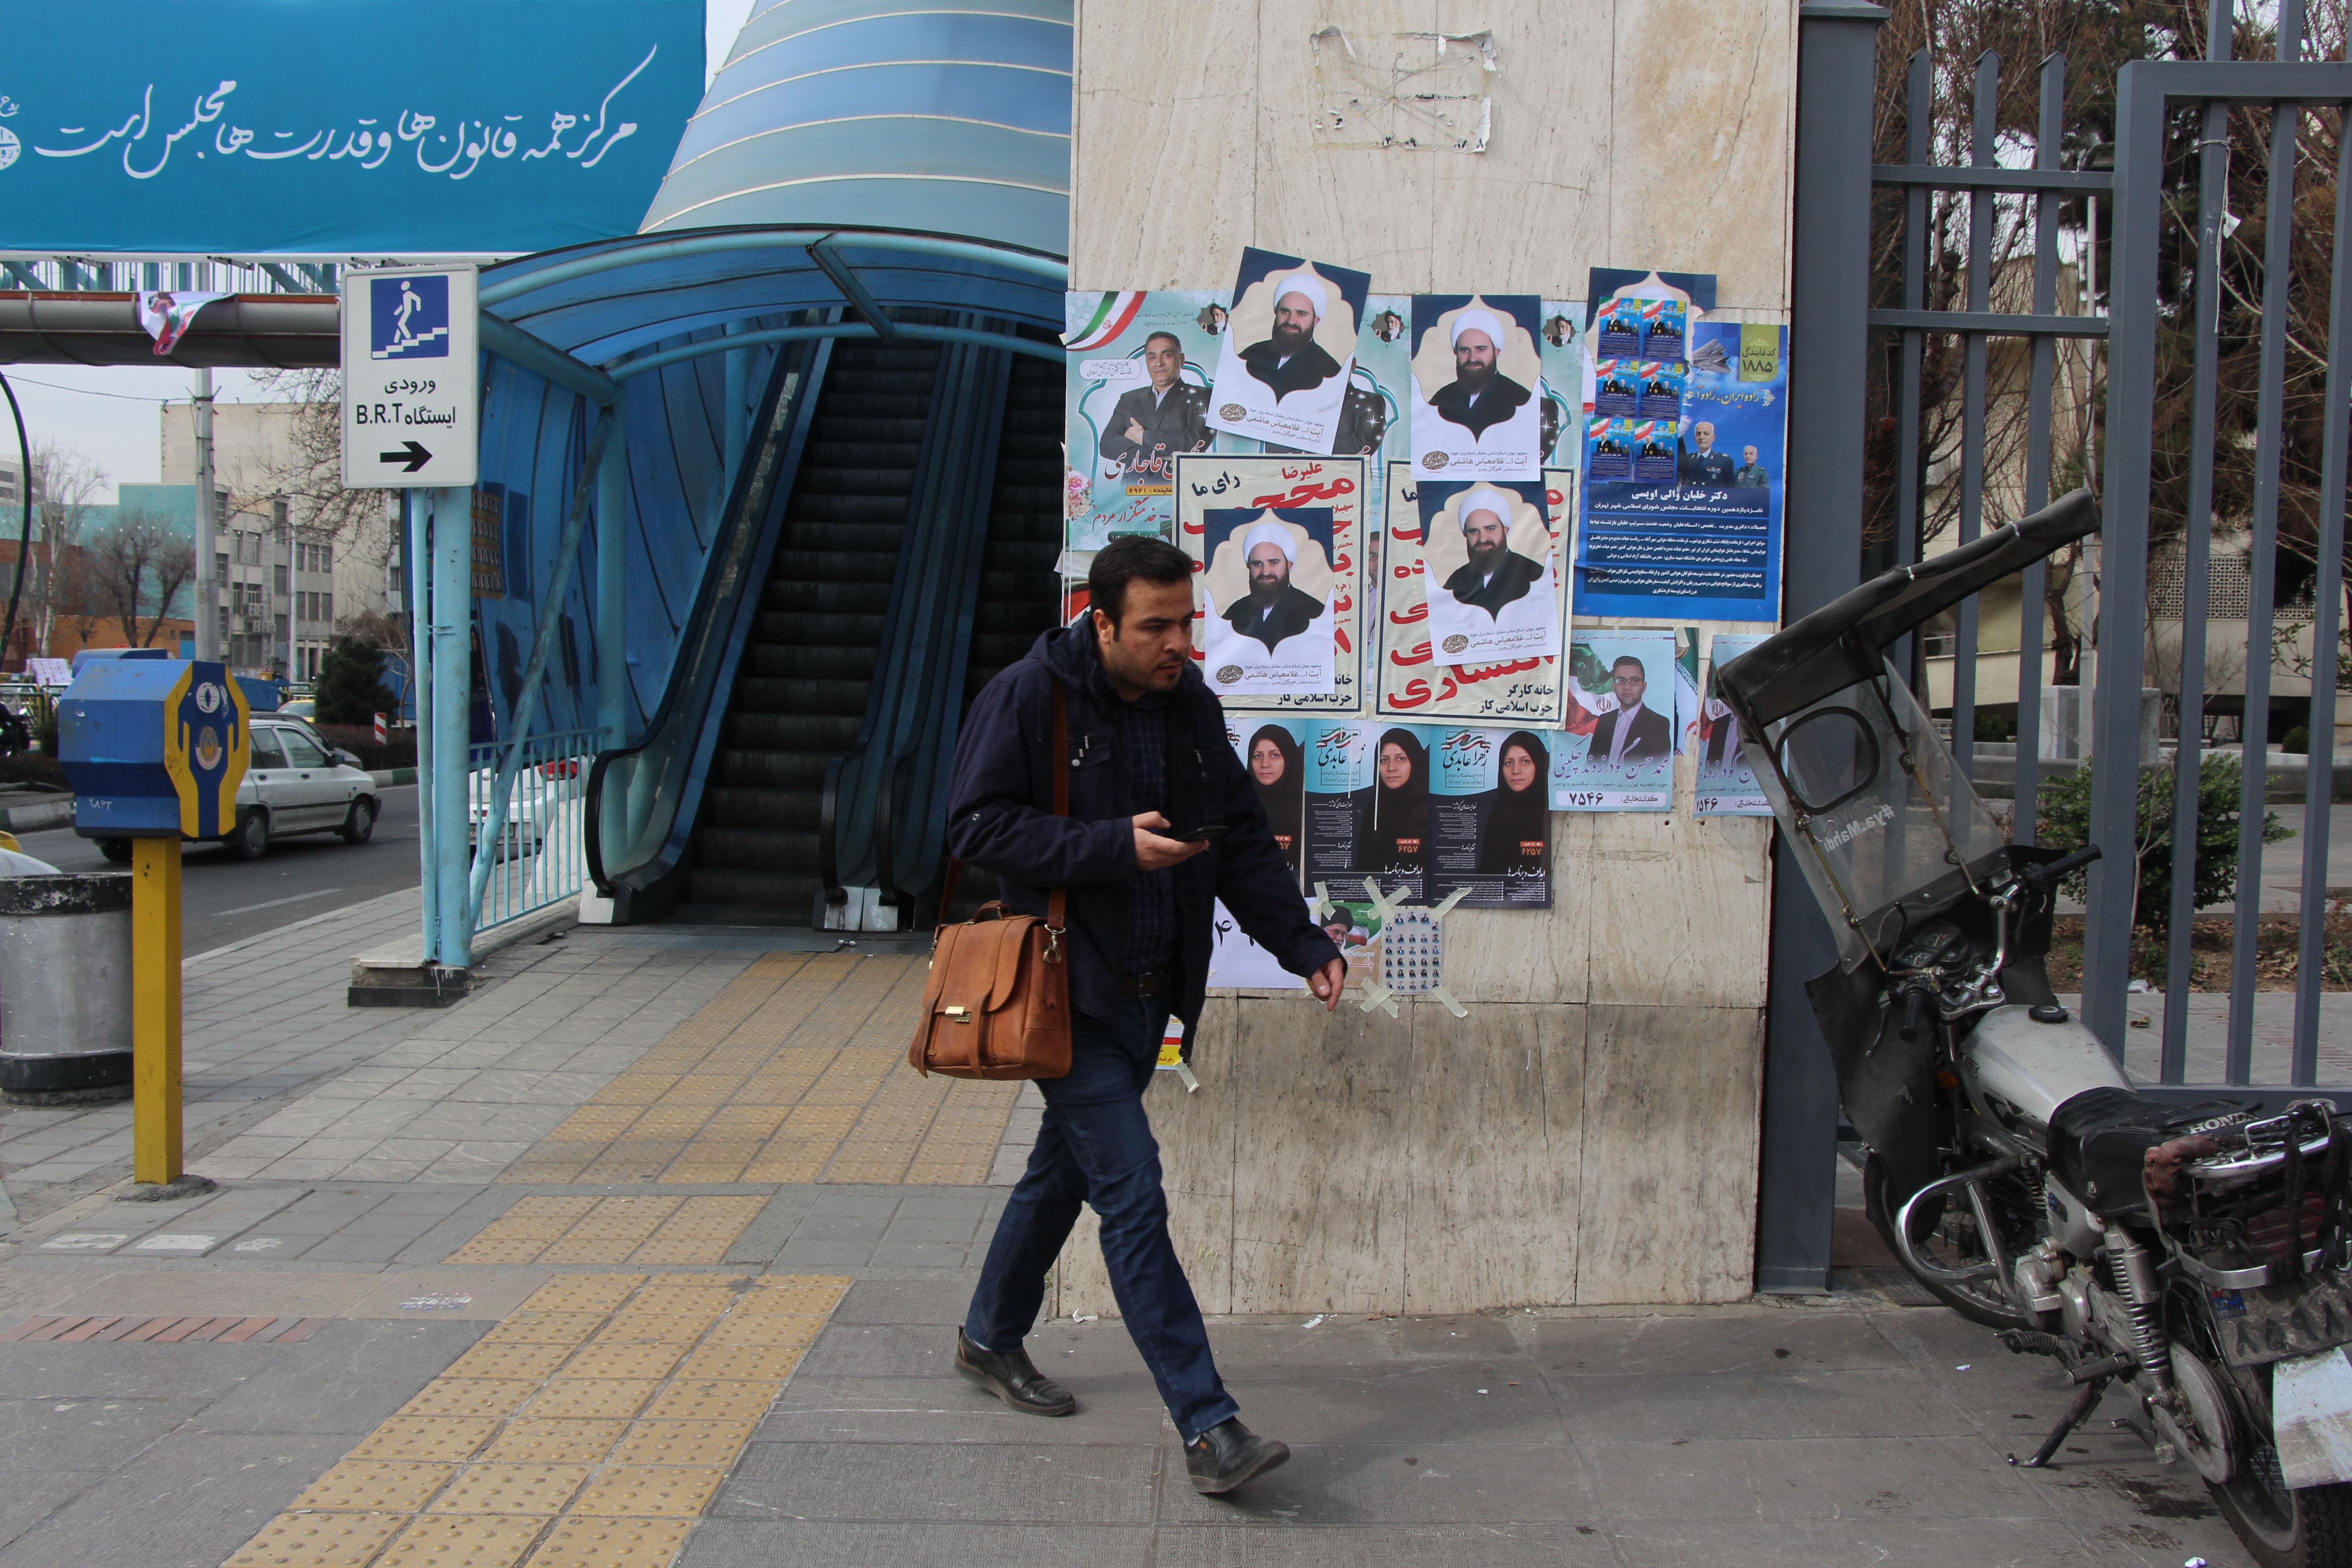 Many Tehran residents ignored the campaign posters and stayed away from the polls. Only 25 percent of Tehran residents voted. Image by Reese Erlich. Iran, 2020.